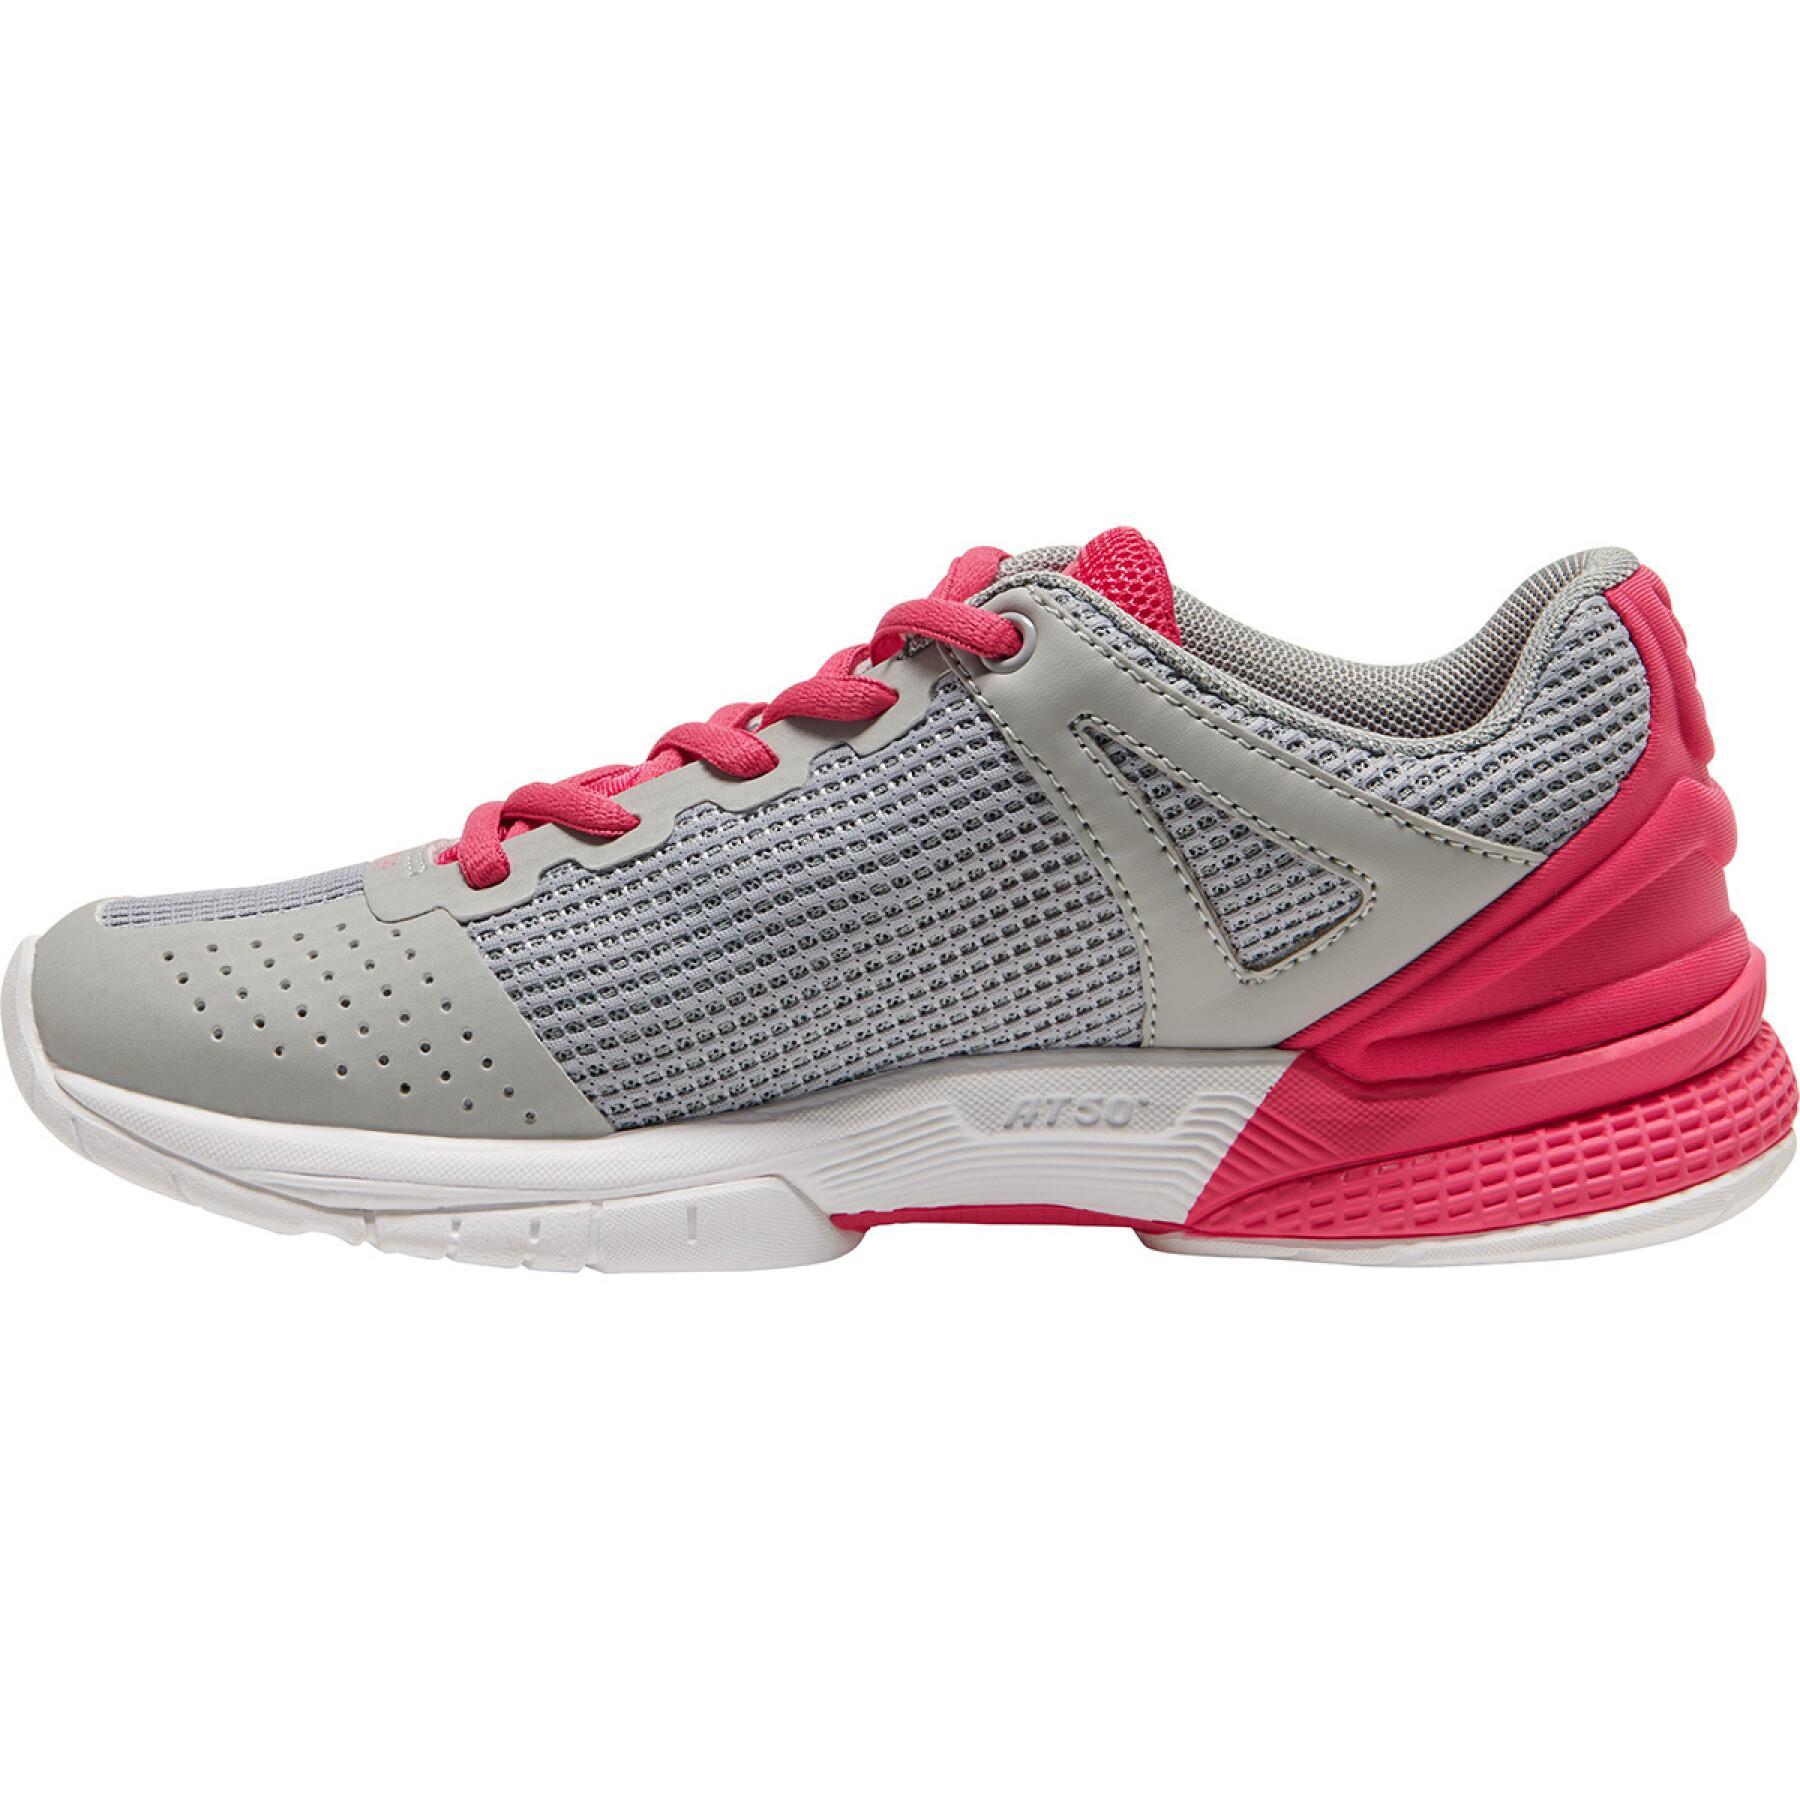 Chaussures femme Hummel aerocharge hb180 rely 3.0 trophy